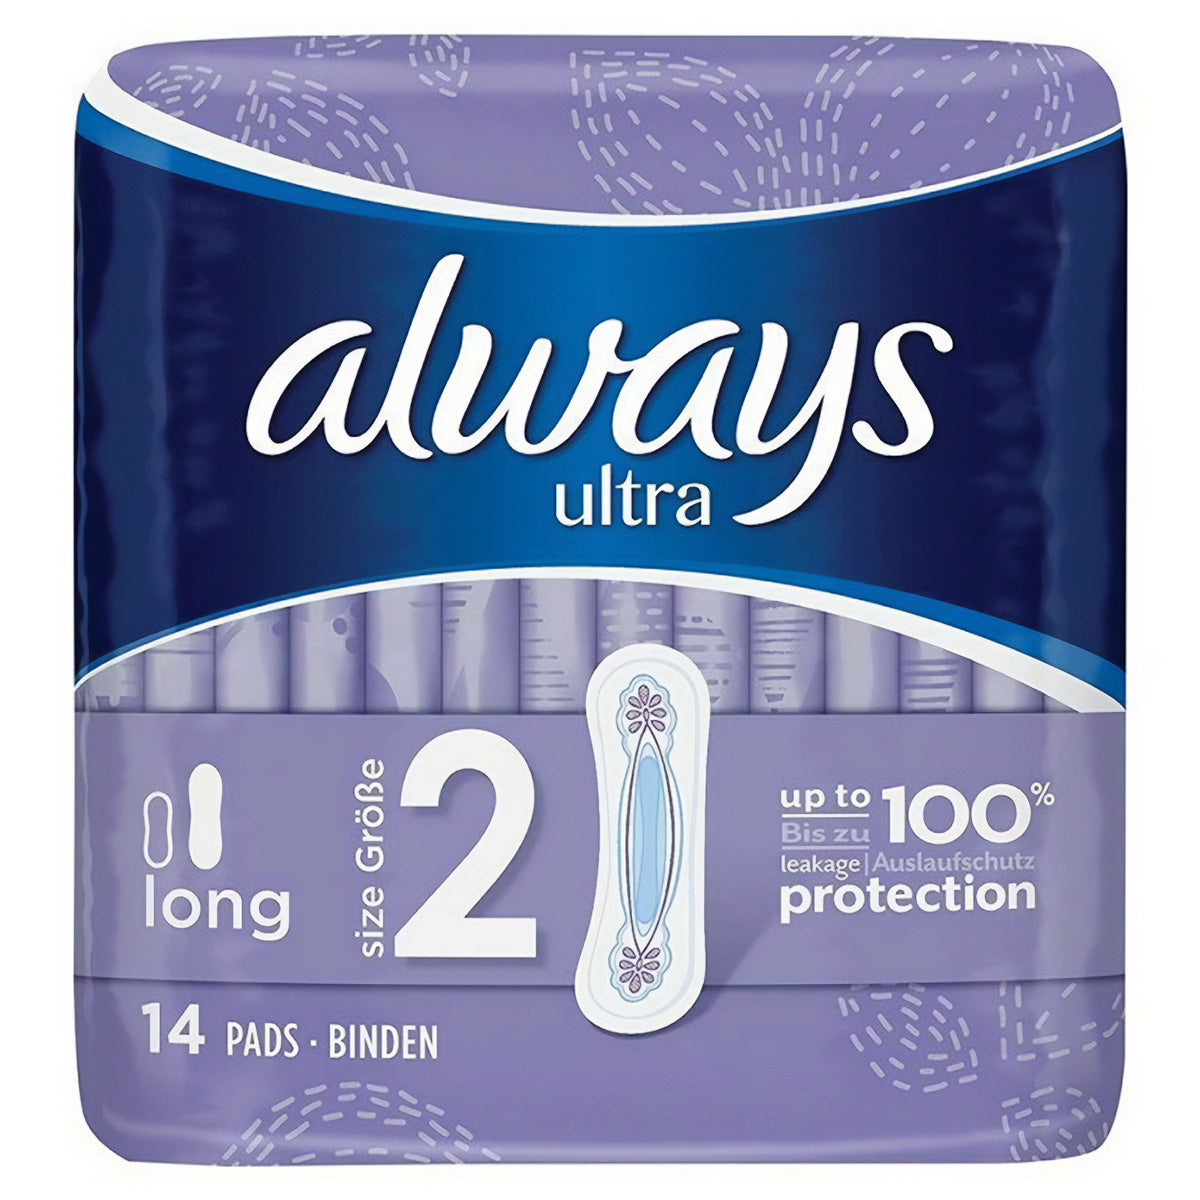 Always ultra long protection wipes -> Always Ultra Long Sanitary Towels Size 2 - 14 Pads.